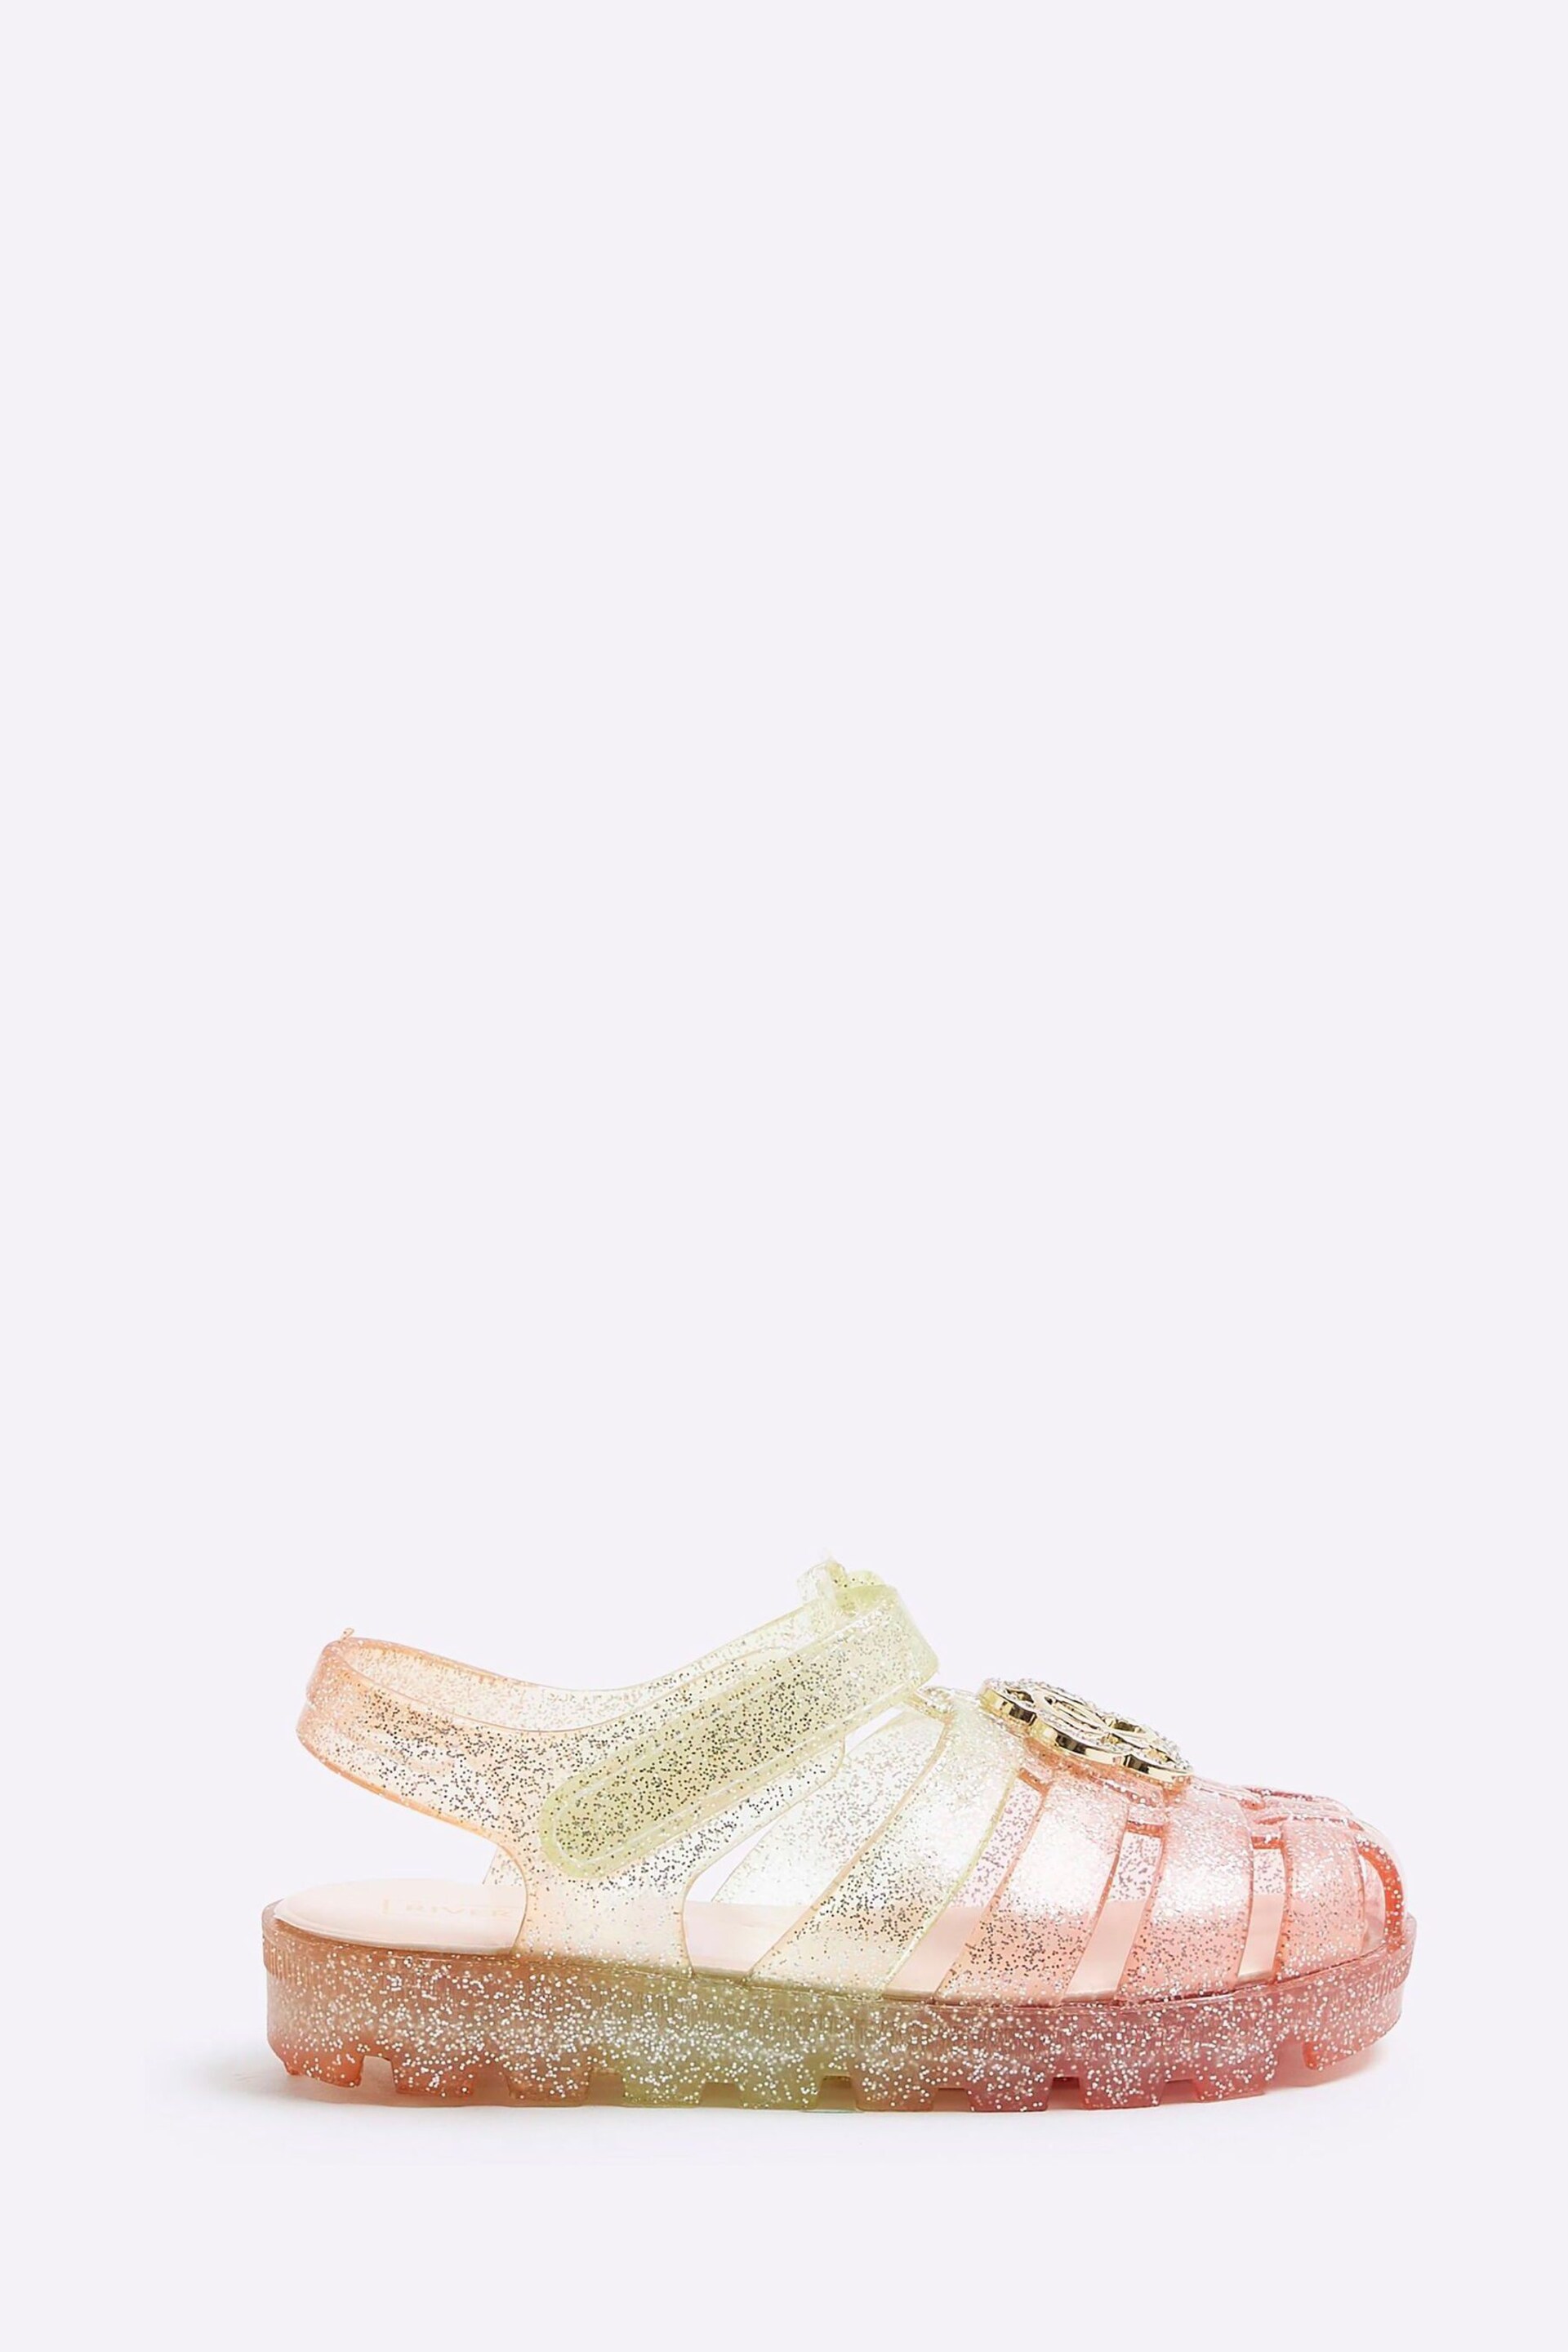 River Island Natural Girls Rainbow Flower Jelly Sandals - Image 1 of 3